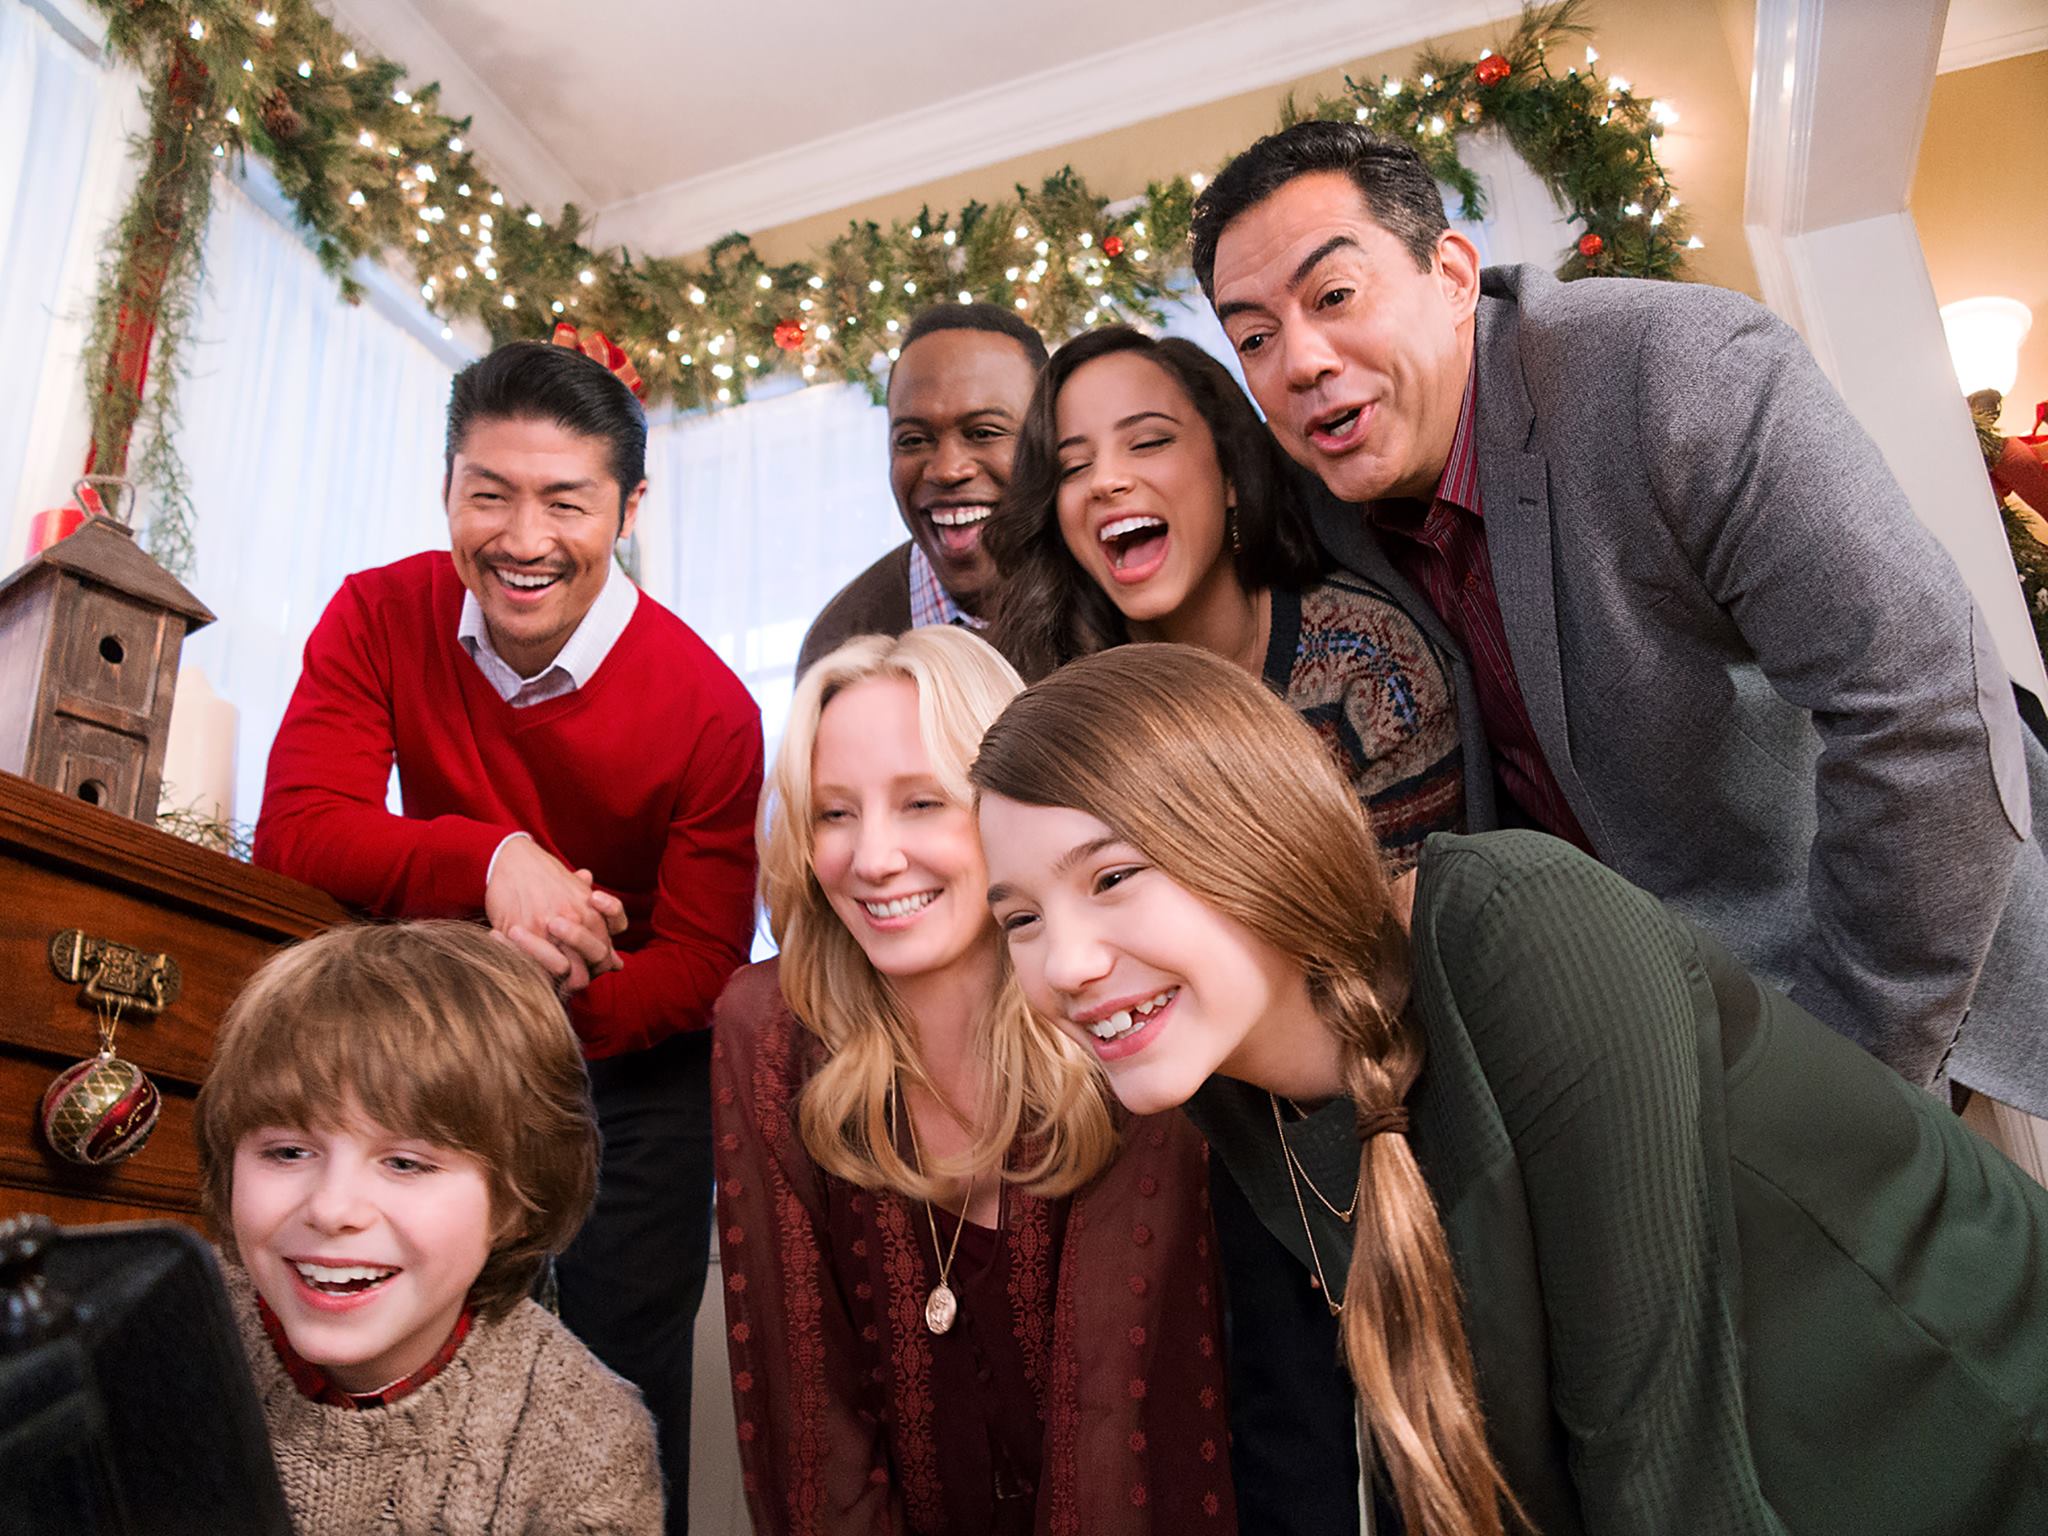 Griffin Kane with Anne Heche, Alissa Skovbye, Brian Tee, Kevin Daniels, Kiara Madiera, and Carlos Gomez on the set of One Christmas Eve, 2014.